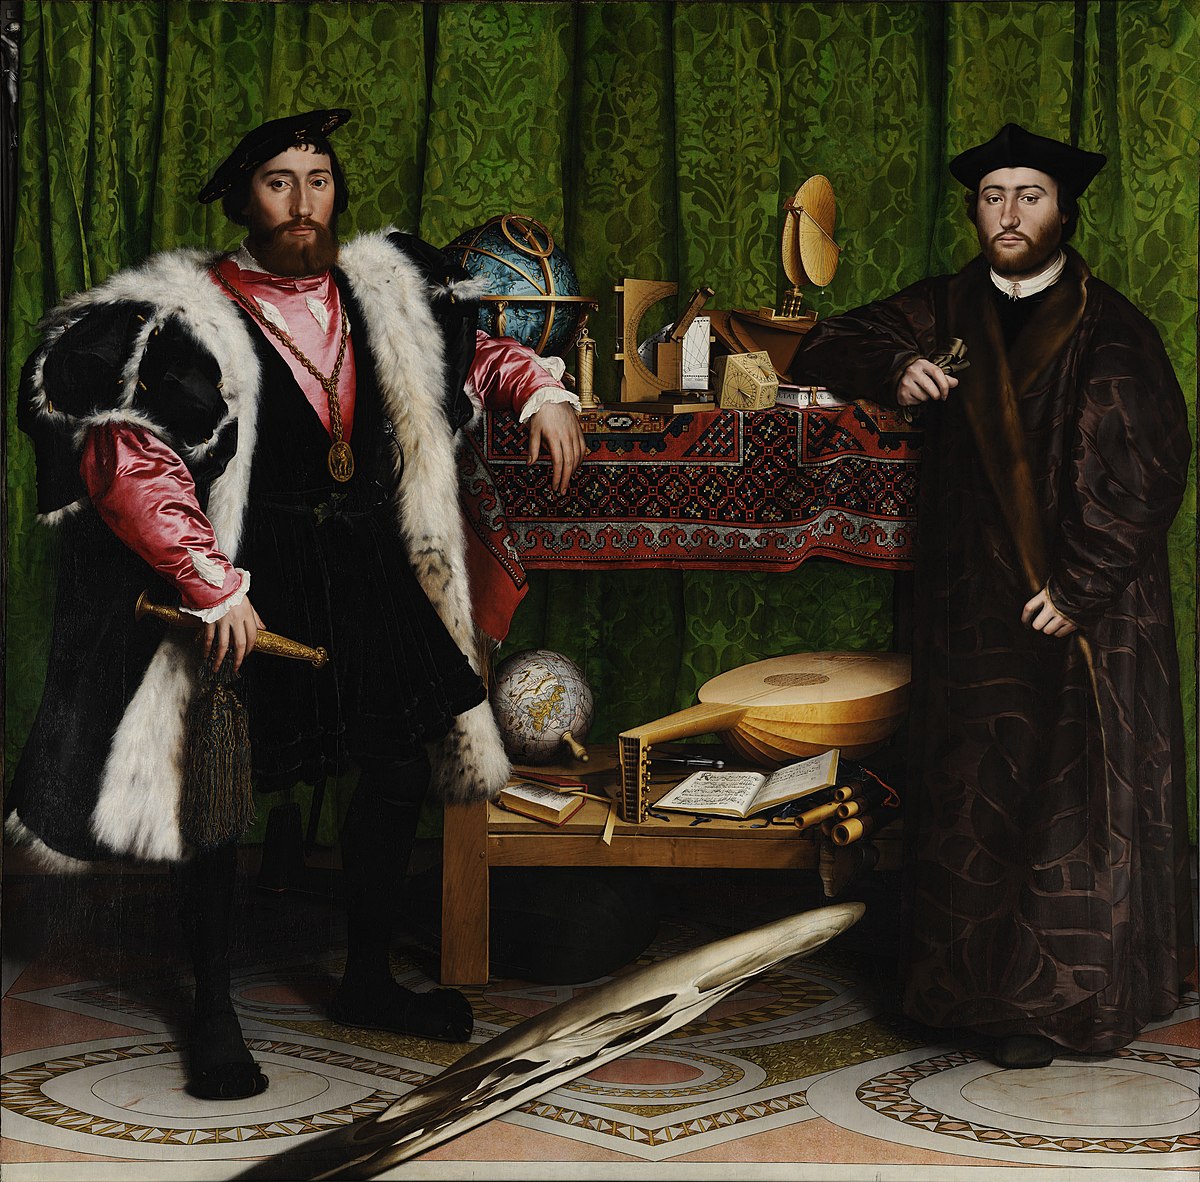 Hans Holbein the Younger - The Ambassadors - Google Art Project.jpg